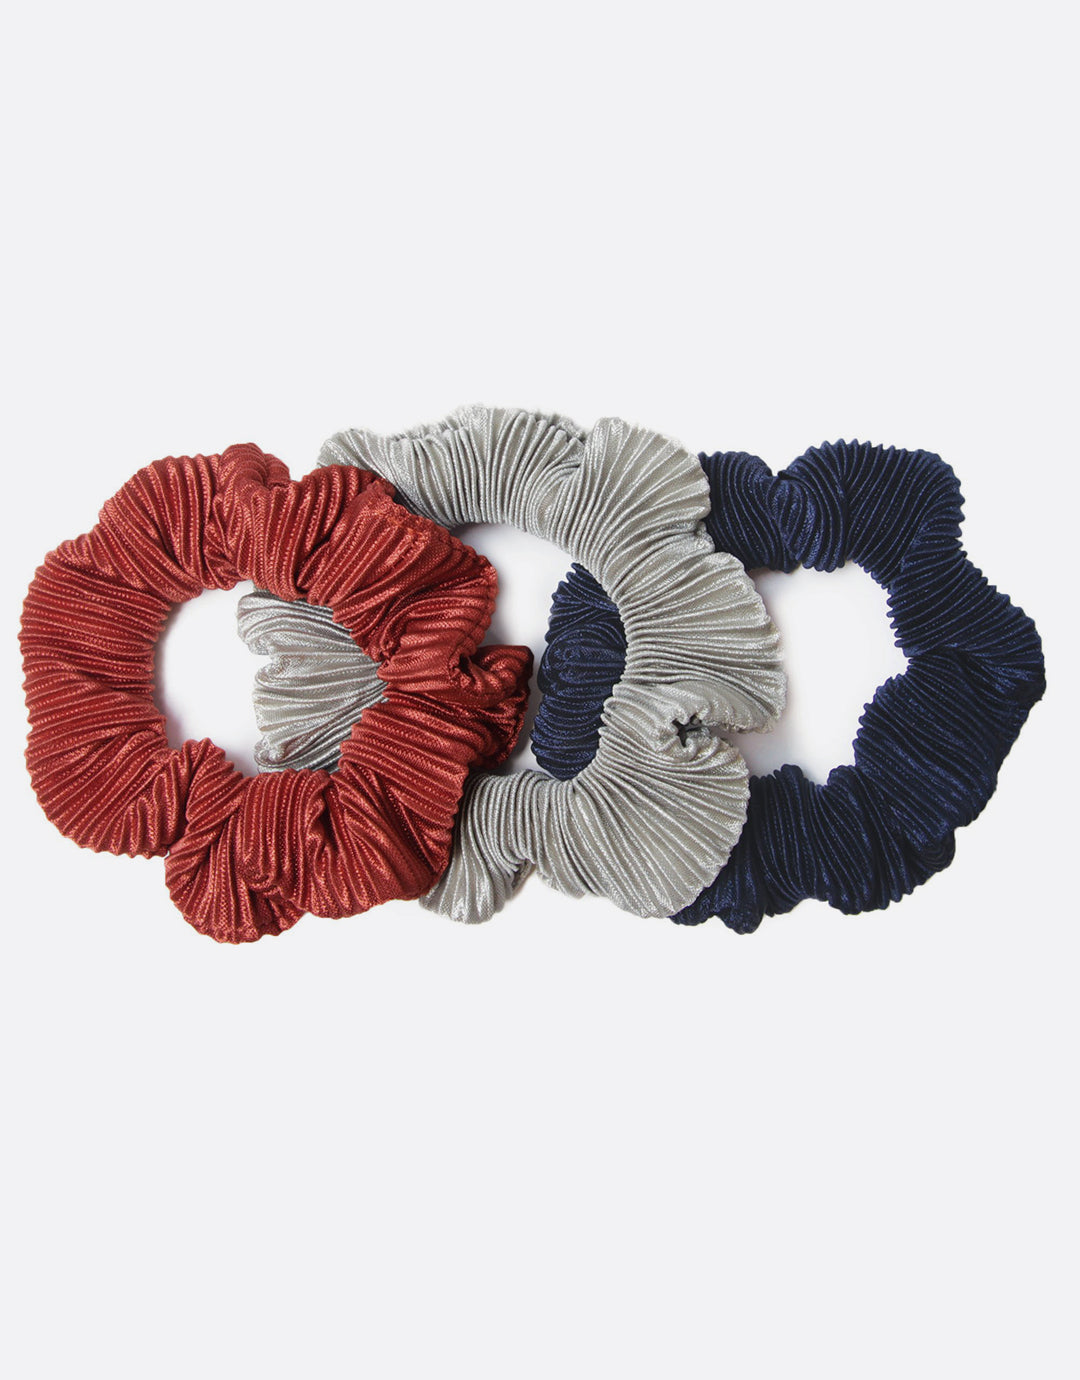 BANDED Women’s Premium Hair Accessories - Serendipity - 3 Pack Pleated Satin Scrunchies